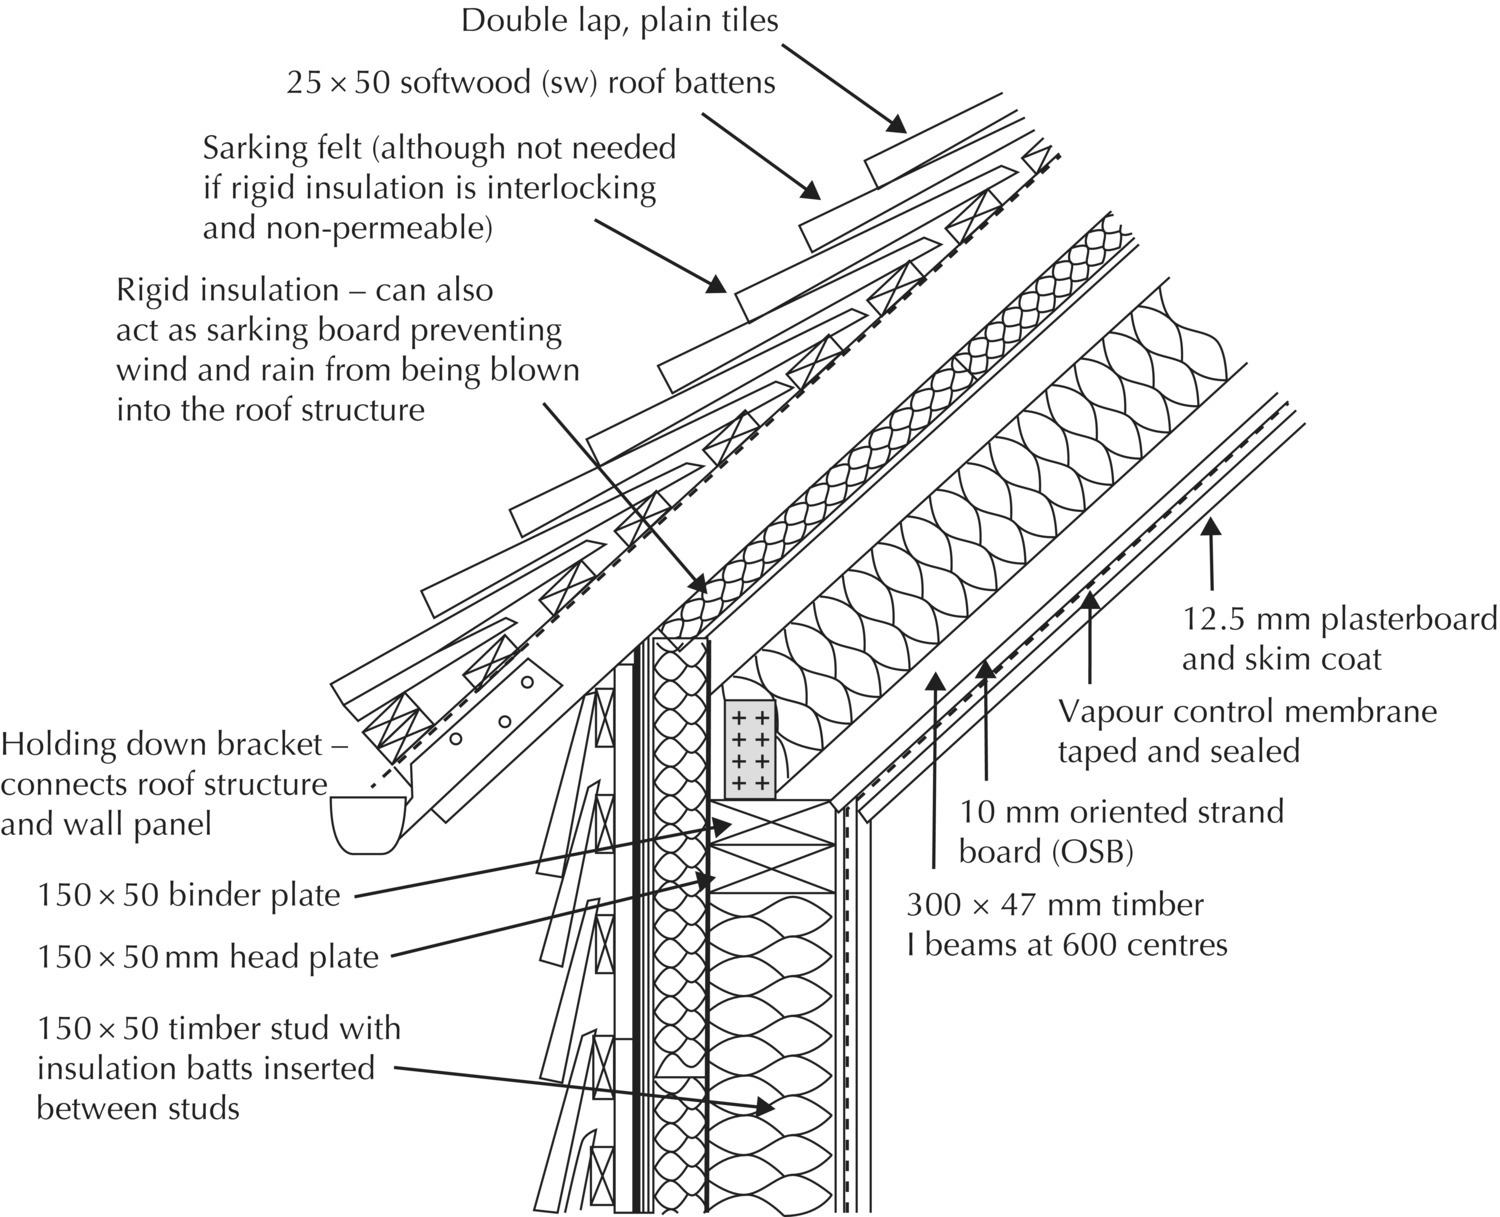 Diagram illustrating the eaves detail of a tile clad timber frame with arrows indicating double lap, plain tiles; 25 × 50 softwood (sw) roof battens; 12.5 mm plasterboard and skim coat; 150 × 50 binder plate; etc.